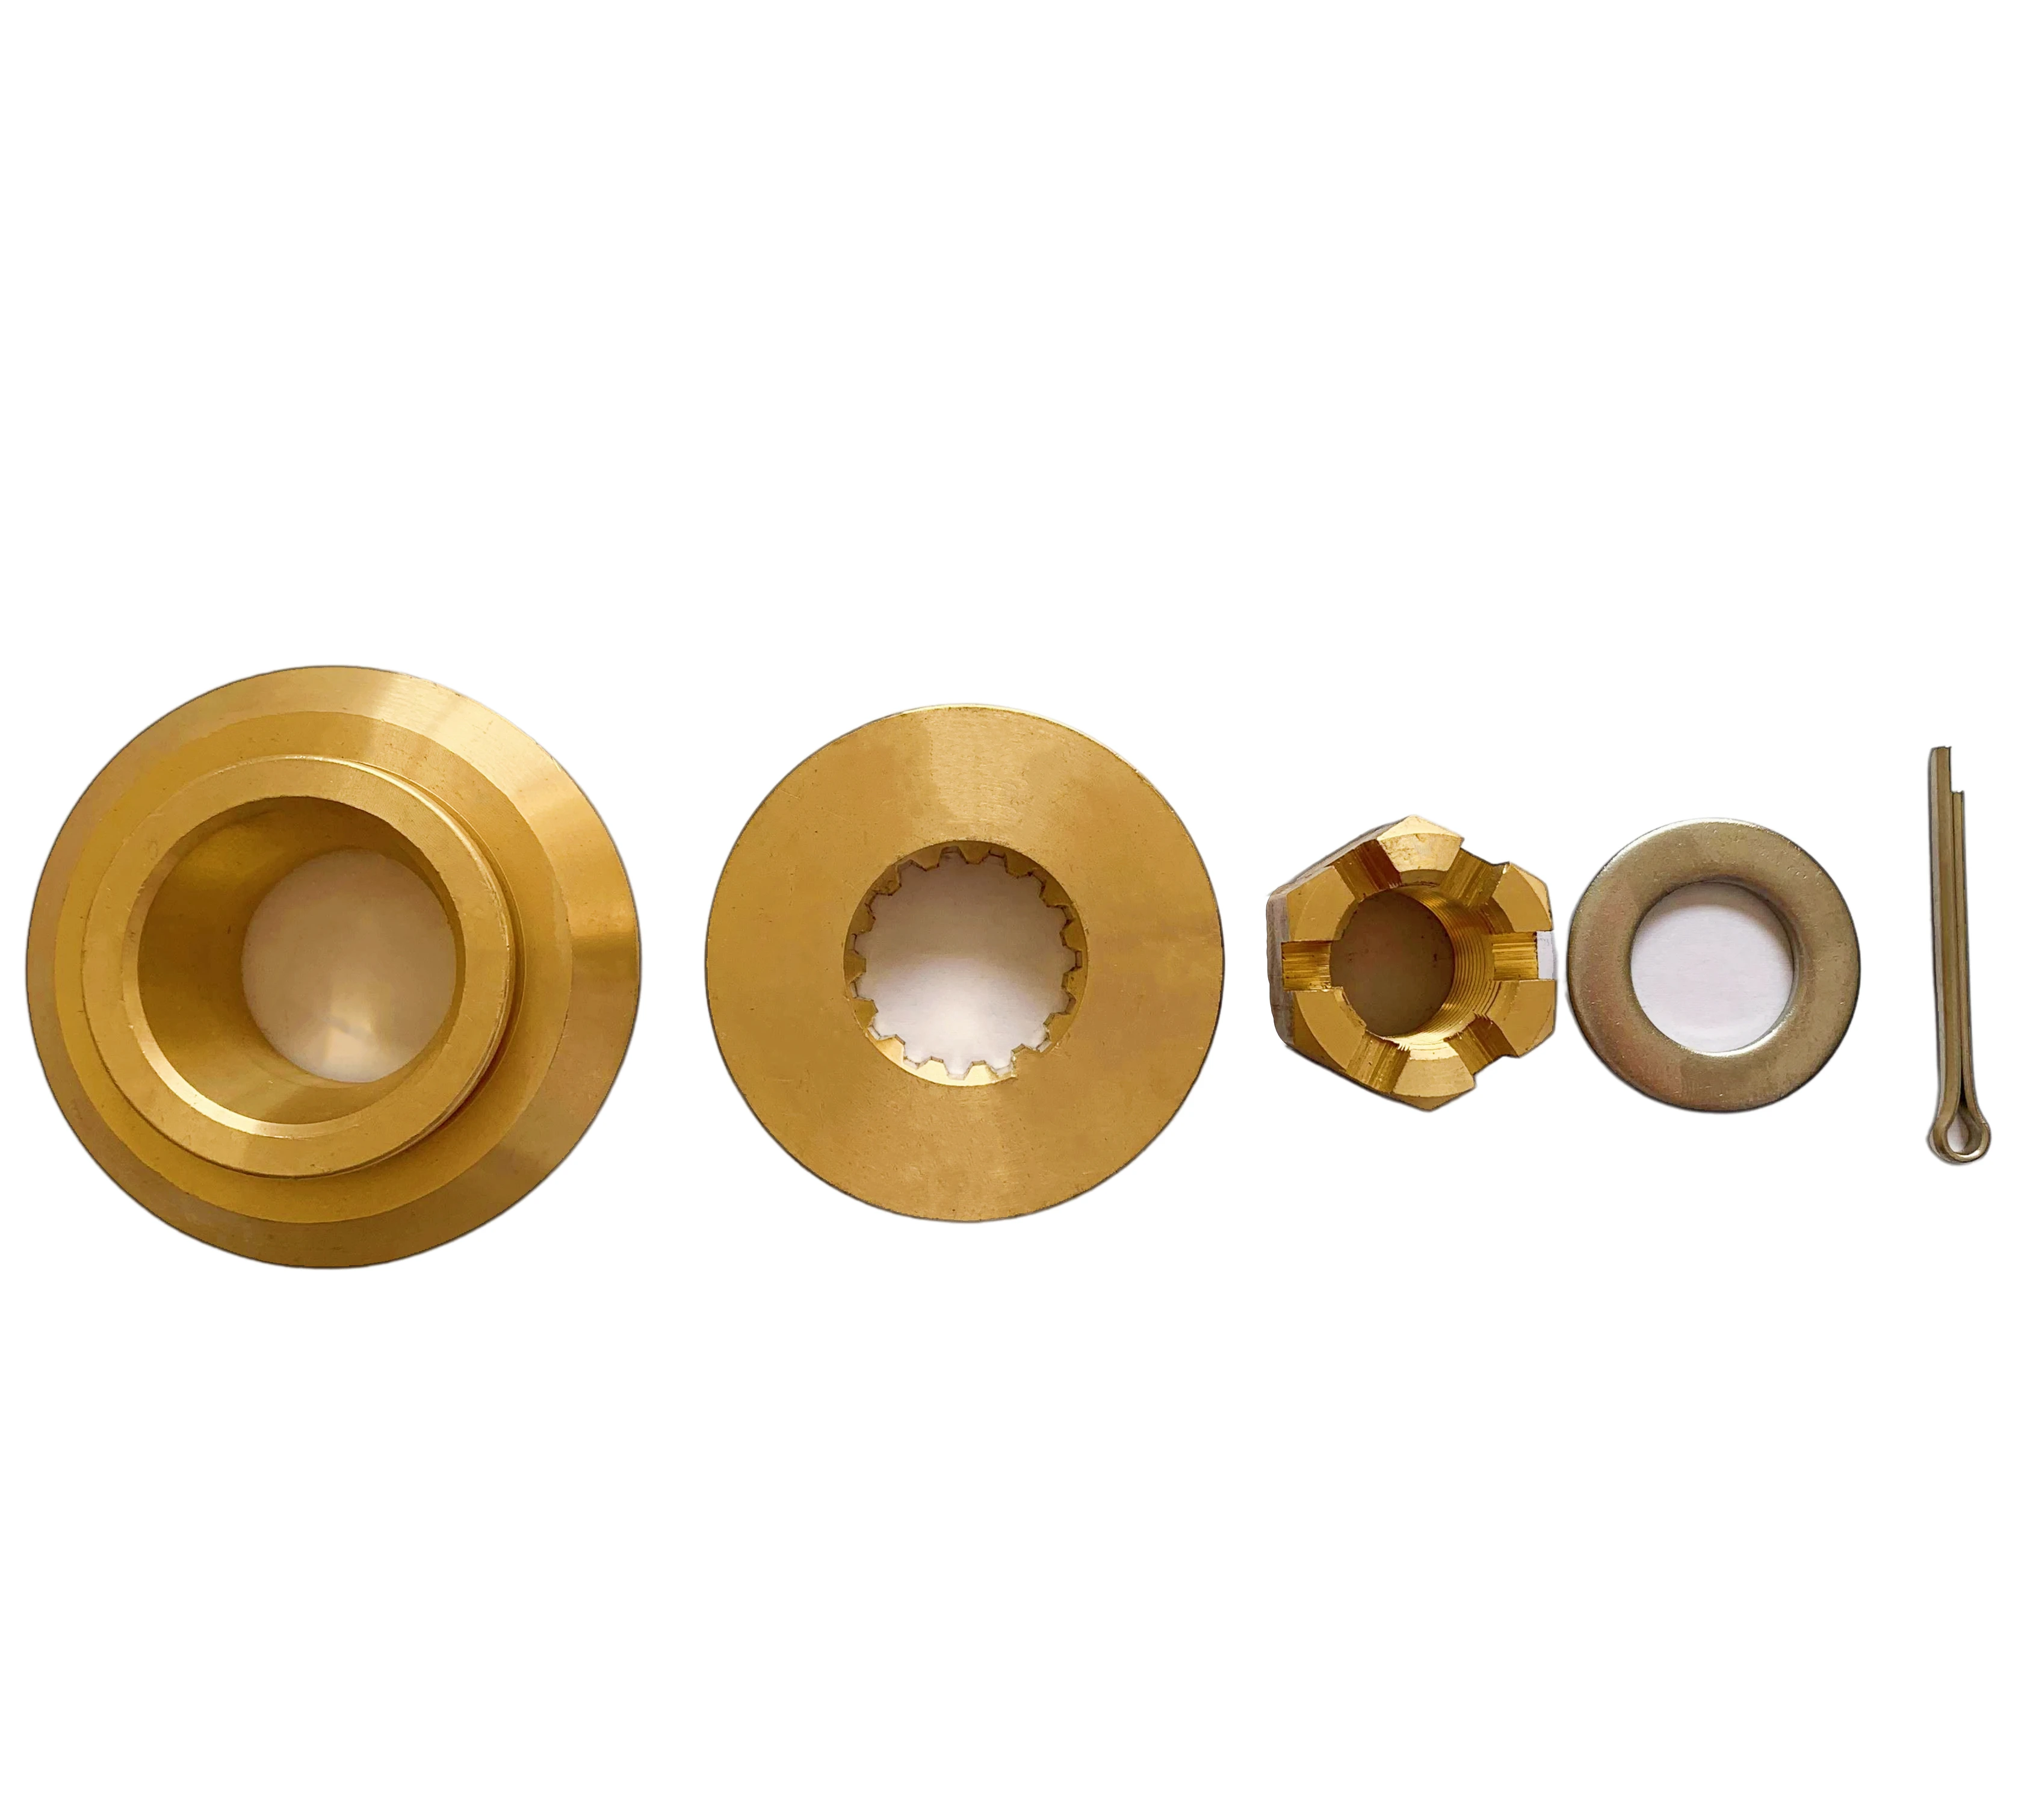 Propeller Installation Hardware Kits fit YAMAHA 150HP-300HP Outboard Motos Thrust Washer/Spacer/Washer/Nut/Cotter Pin Included